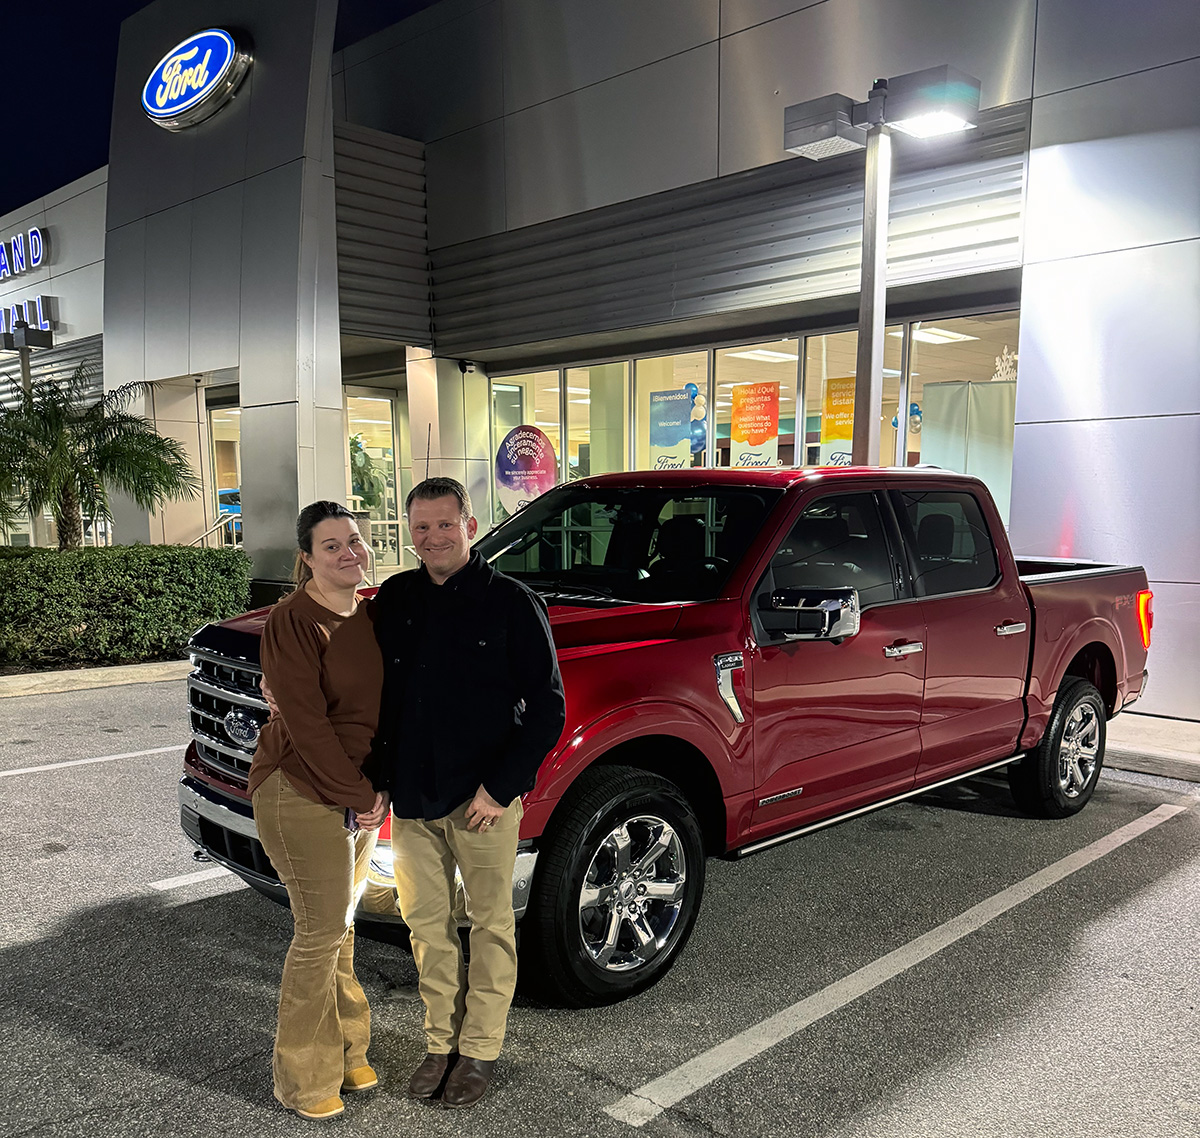 When 'Tre' Towels was looking to get a new #F150, it was #LakelandFord that he came back to as a #RepeatCustomer because 'I will not buy a Ford from anywhere else.' Absolutely #Awesome Tre & #ThankYou for coming back - #Enjoy your #NewTruck - We're here for you! #FordFamily